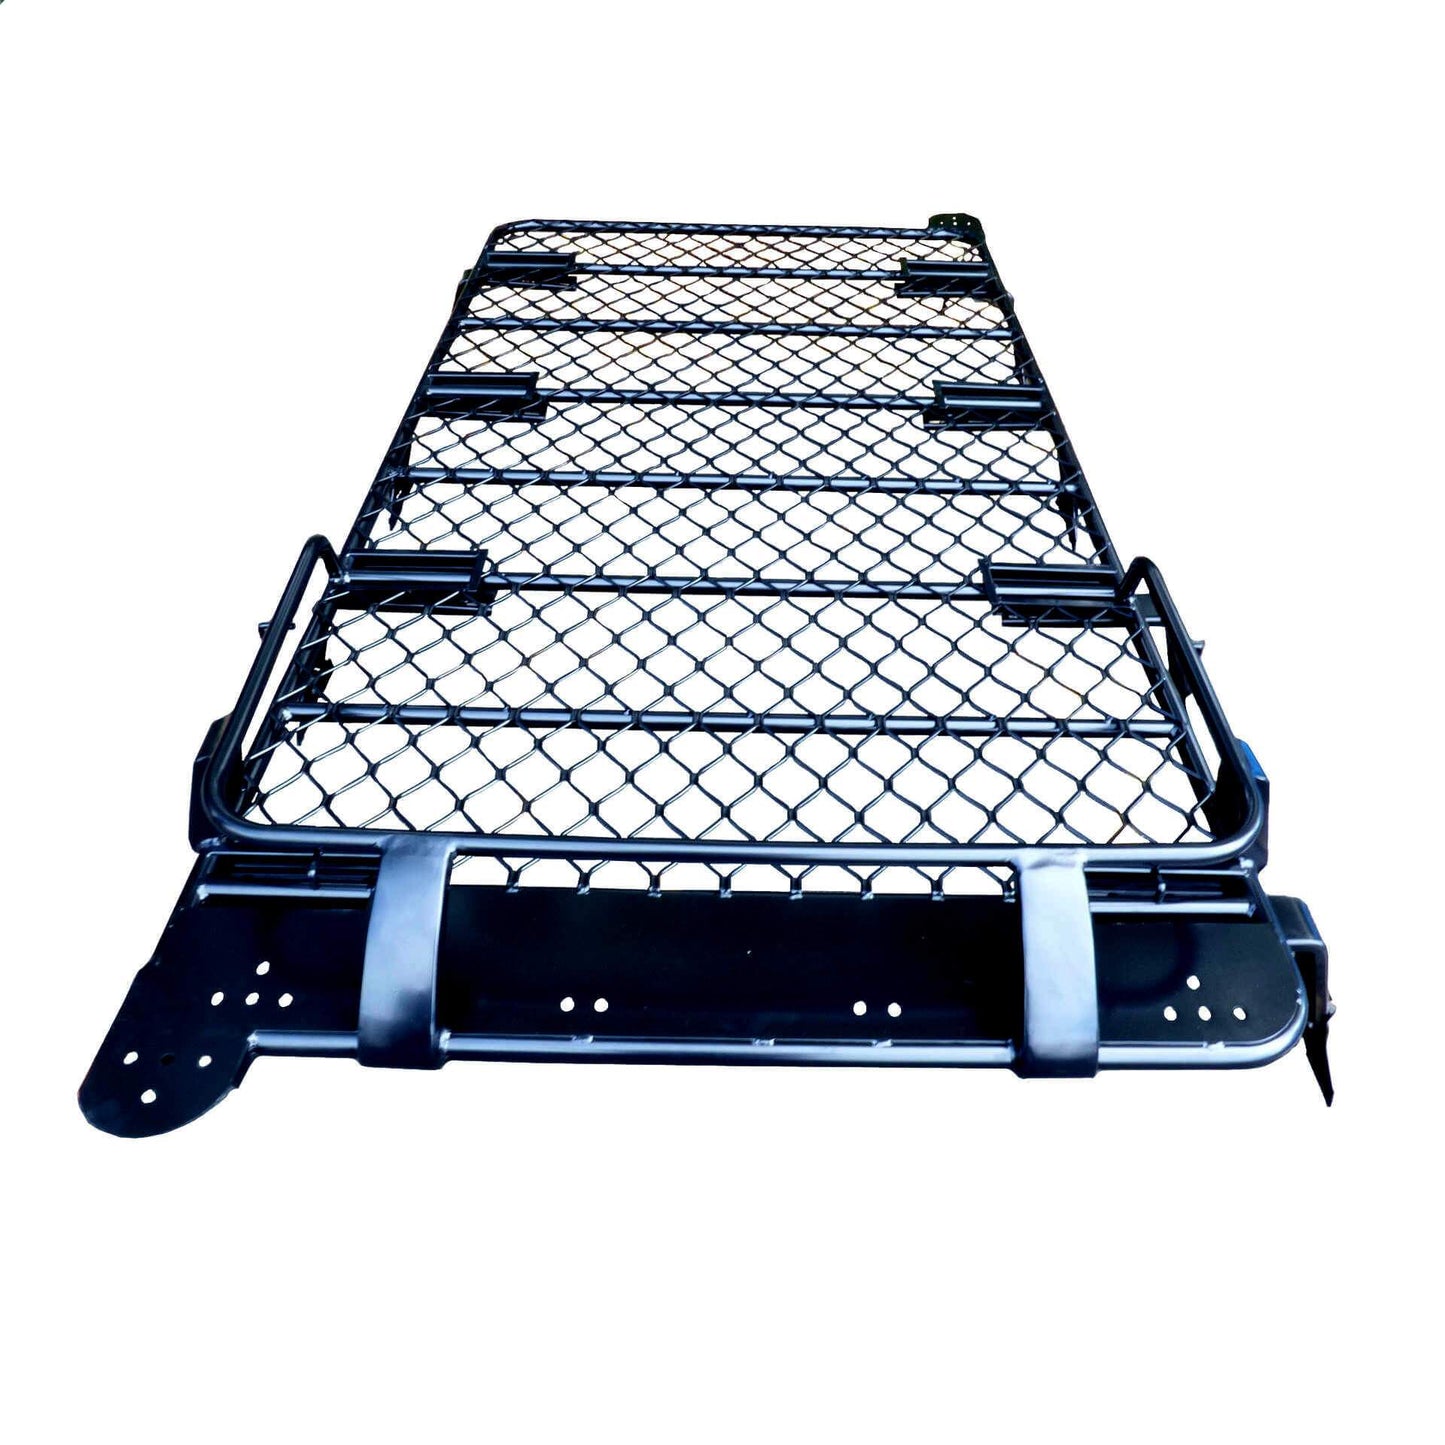 [CLEARANCE] Expedition Roof Rack for Land Rover Discovery 1 and 2